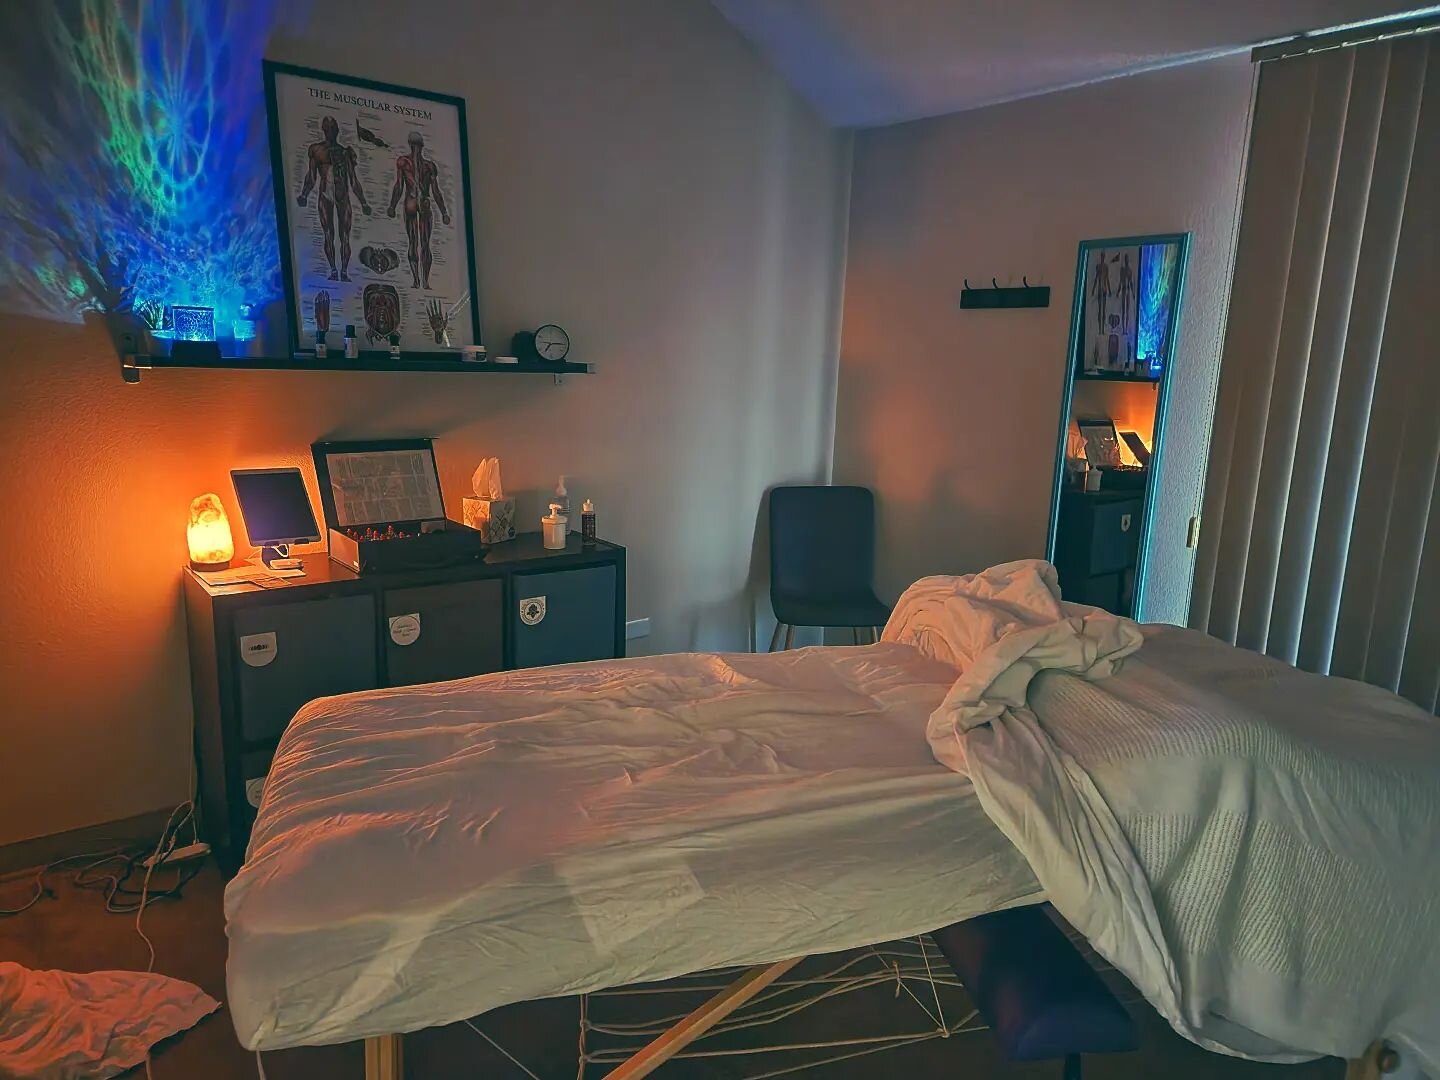 Good Vibes ✨️
...The massage room at the end of a busy day 😌 😴 

#Massage #vibes #goodenergy #goodvibes #massagetherapy #bodywork #wellness #healing #Colorado